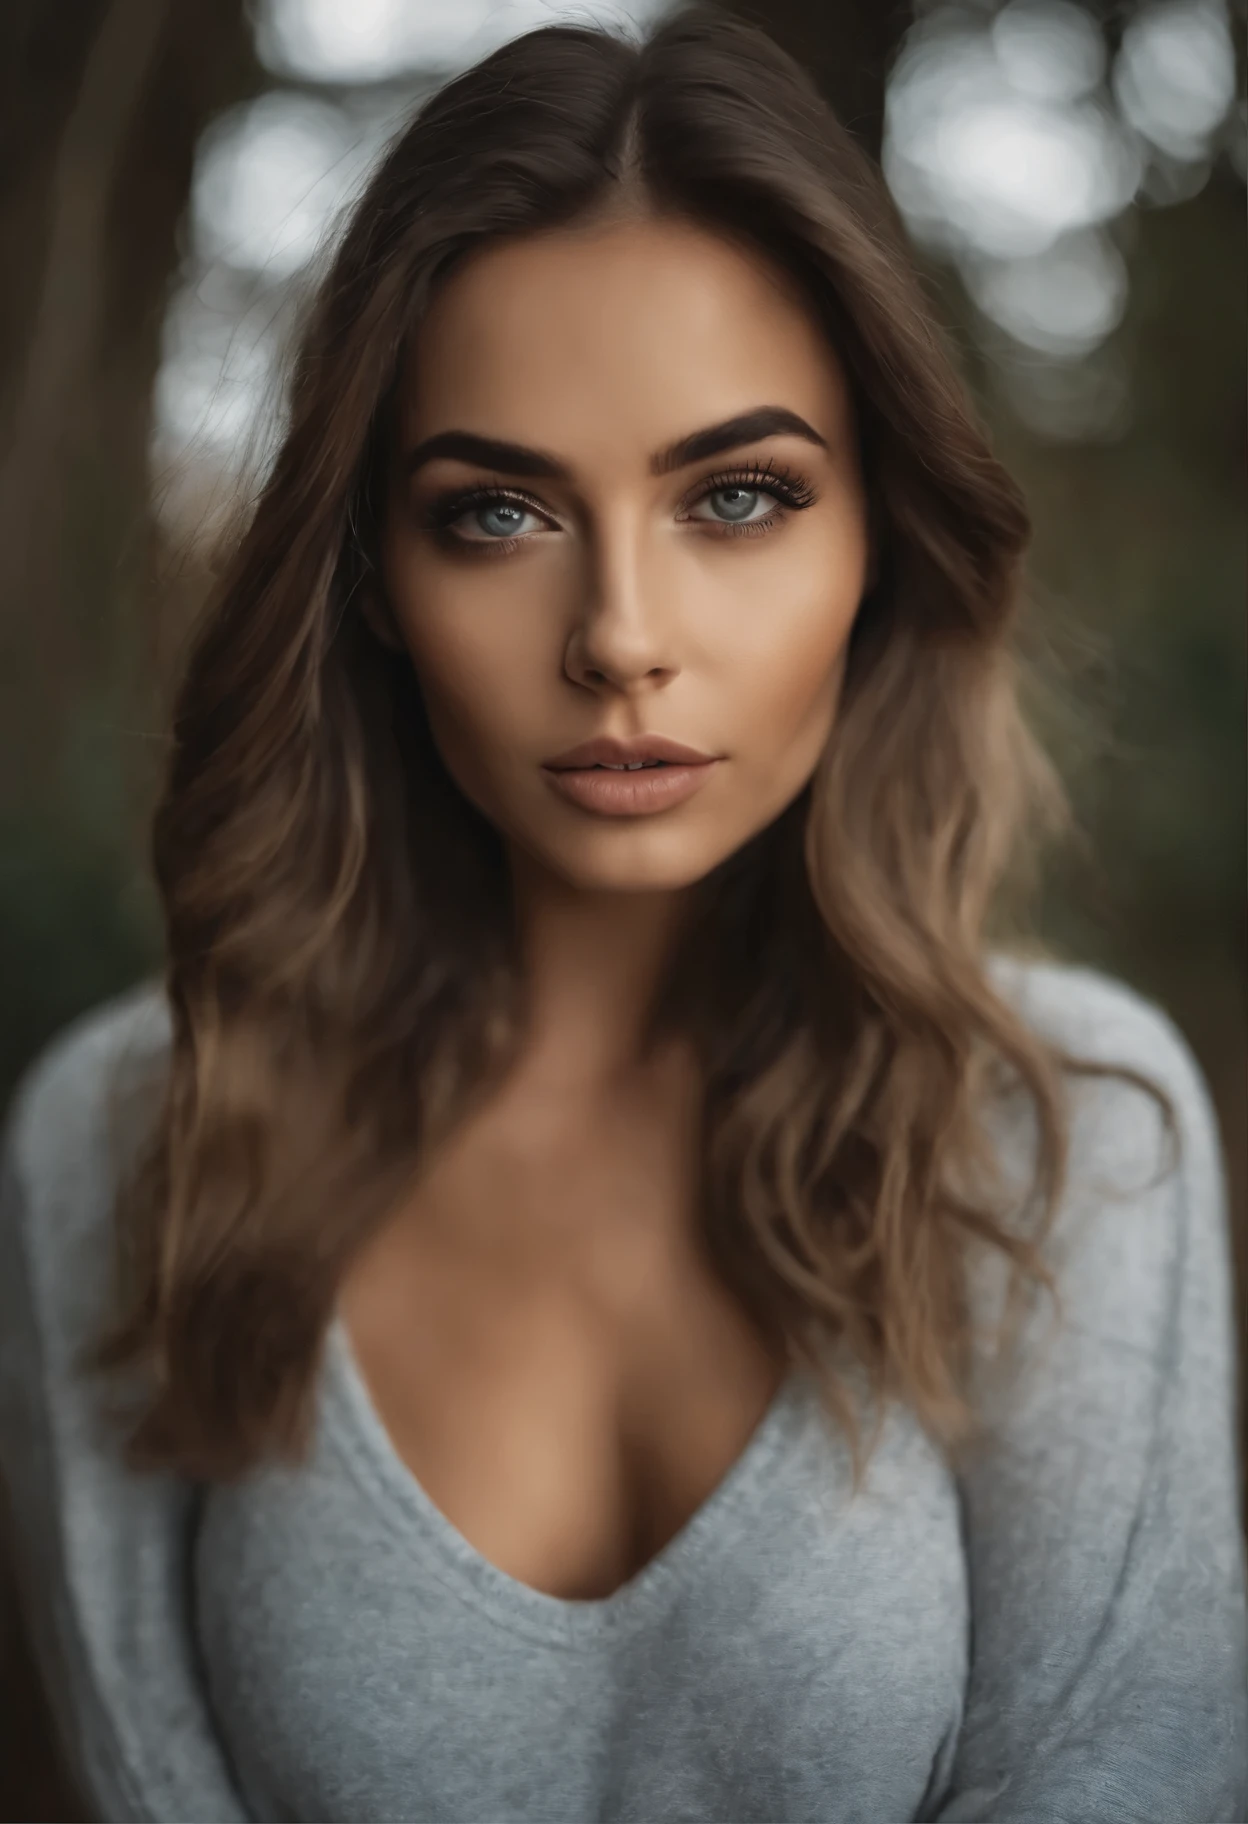 totally naughty woman , Sexy girl with blue eyes, ultra realistic, meticulously detailed, Retrato de Sophie Mudd, blonde hair and big eyes, selfie of a young woman, Olhos do quarto, violet myers, no-makeup, Make-up natural, looking directly at the camera, guy with artgram, subtle makeup, Stunning full body photo, naturey, sunshine light, smiling, sexy big size bust